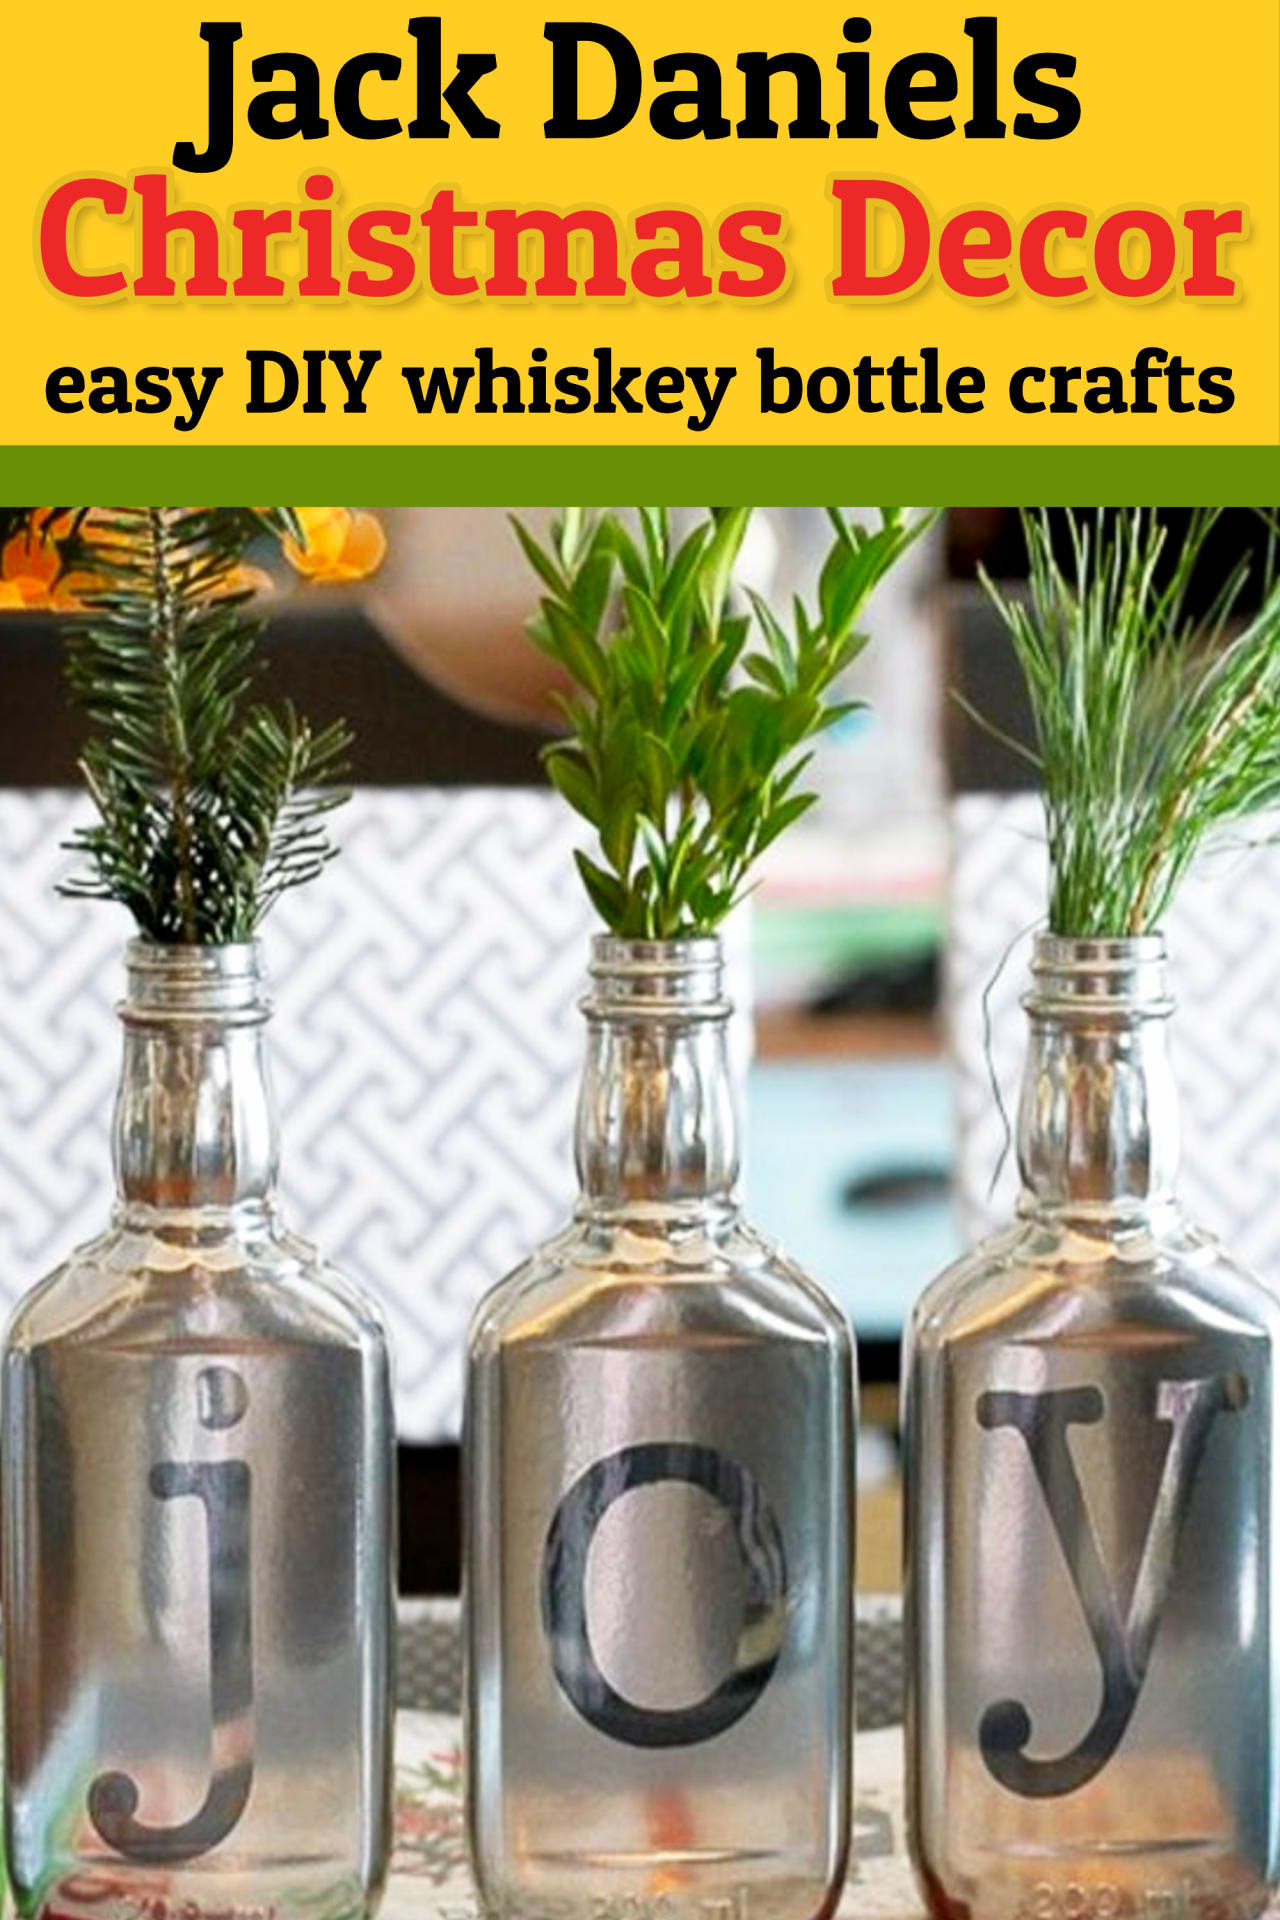 Jack Daniels Christmas Decor Ideas and more Whiskey Bottle Crafts